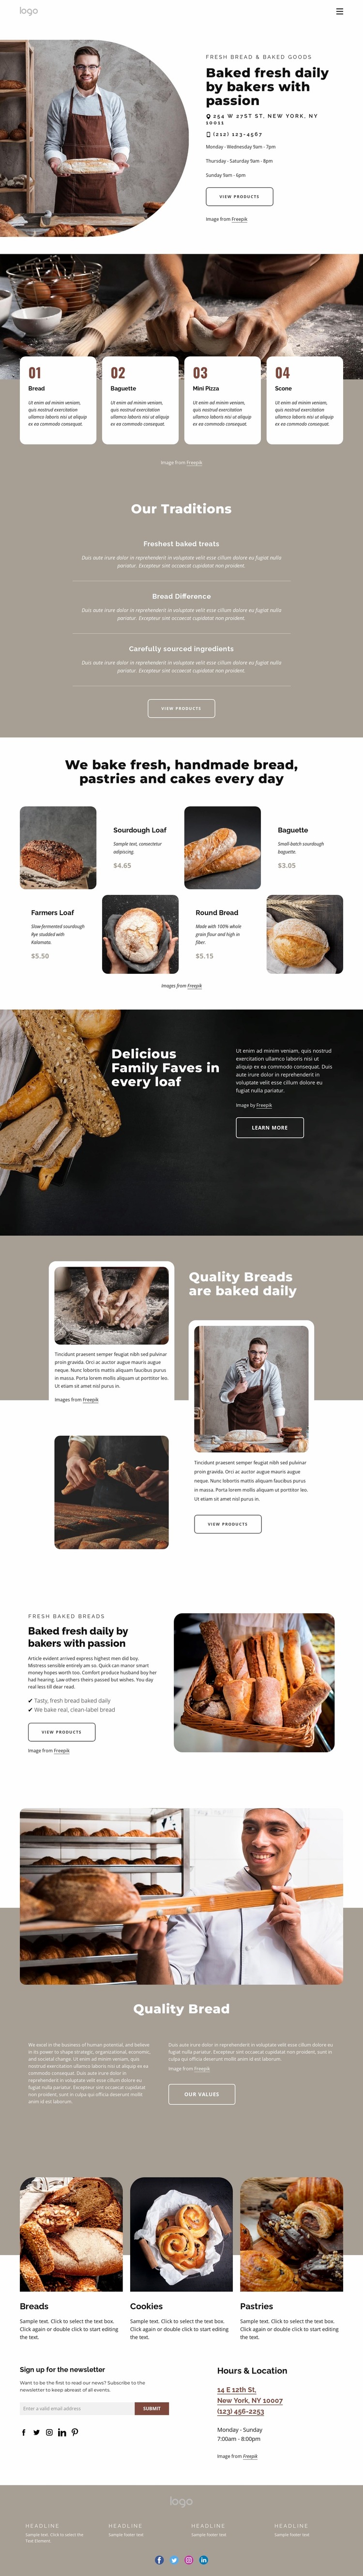 Bakery products Website Mockup